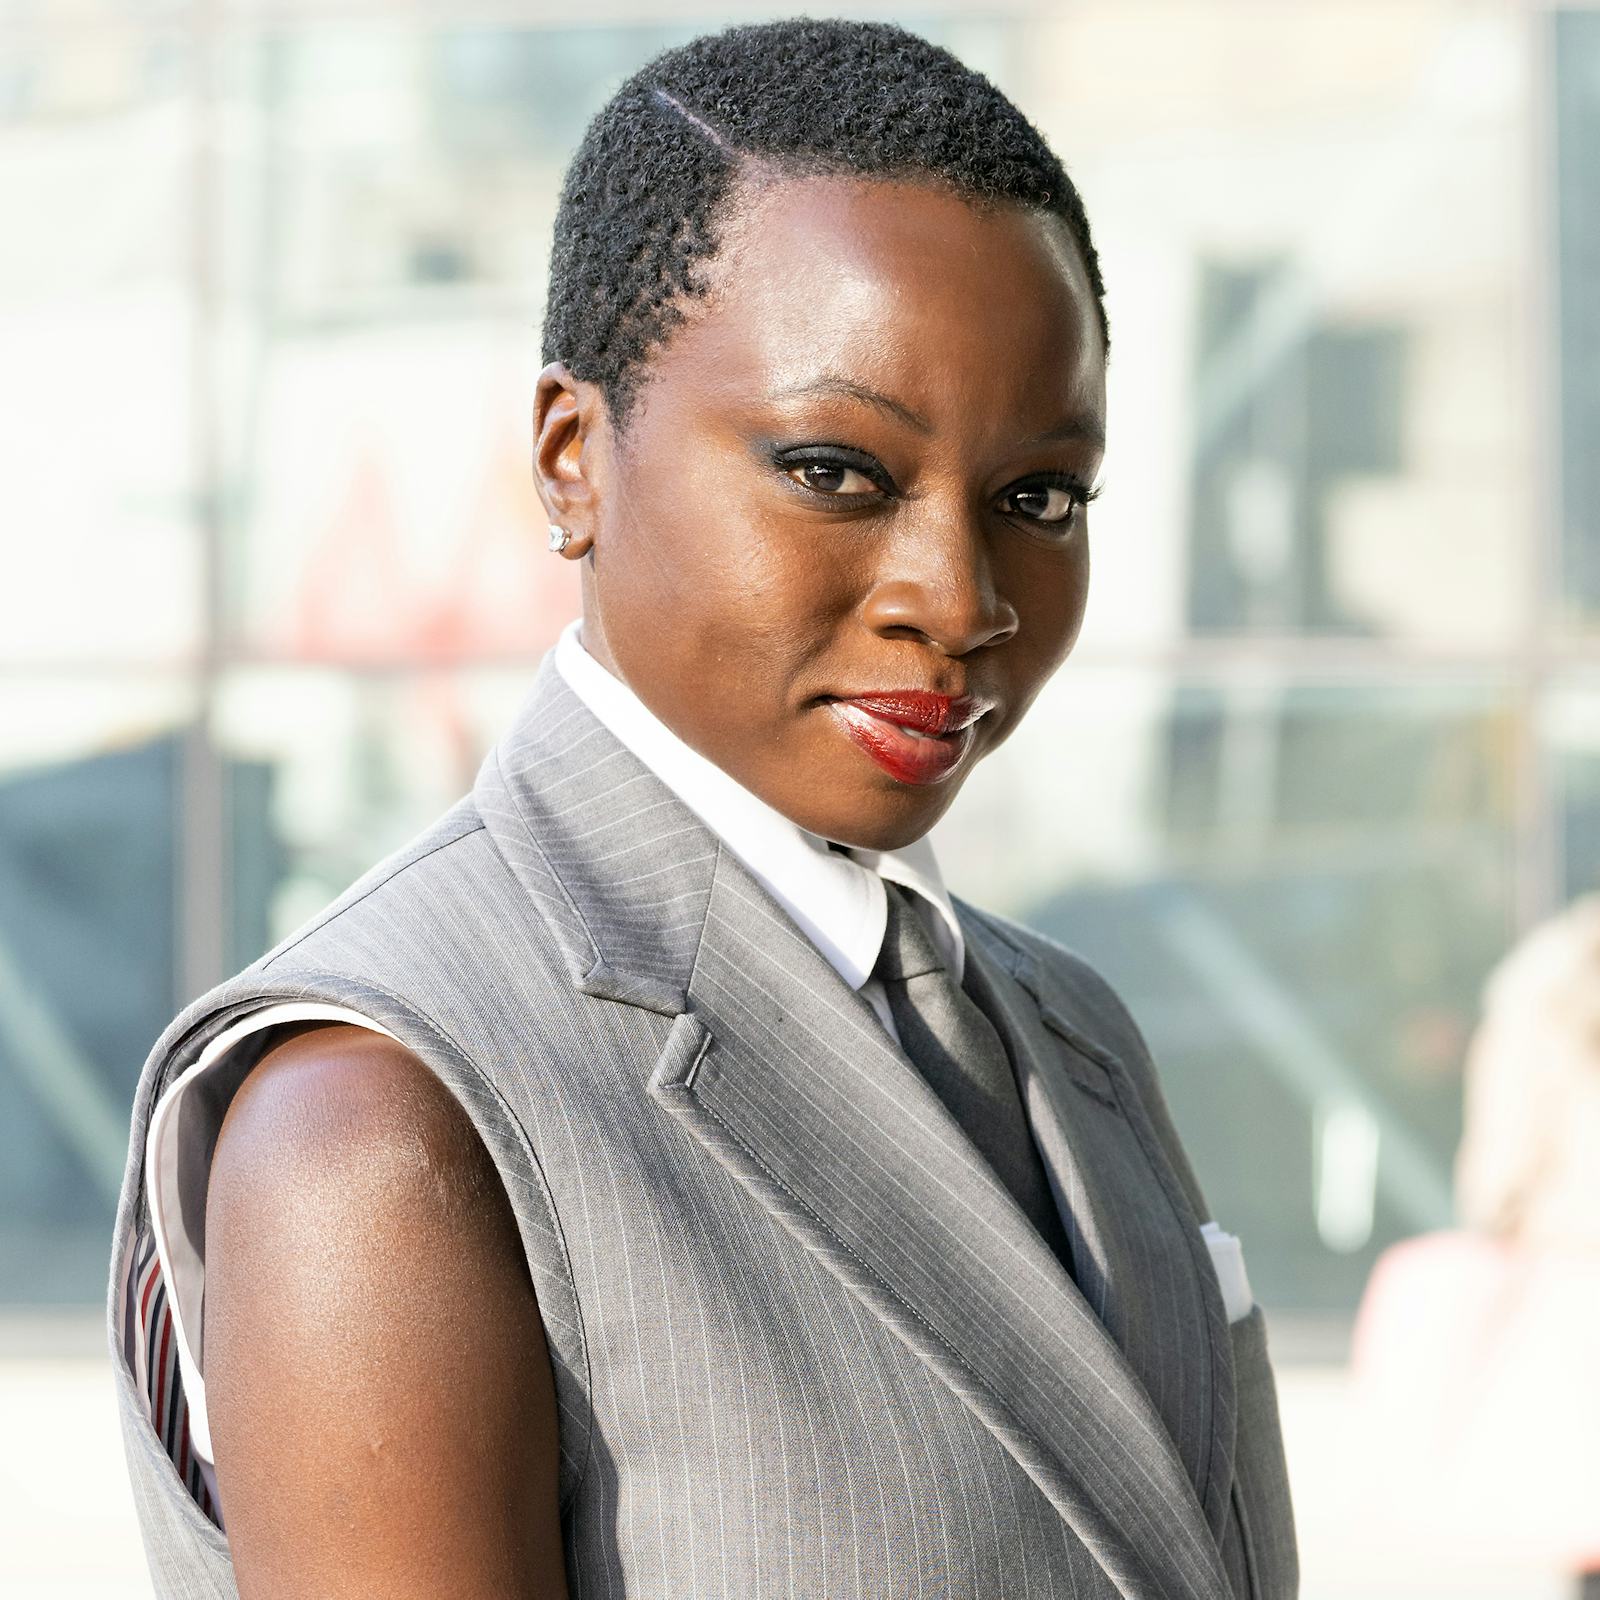 Danai Gurira’s Stunning Sheer Catsuit Look Gives Subtle Sexy Vibes